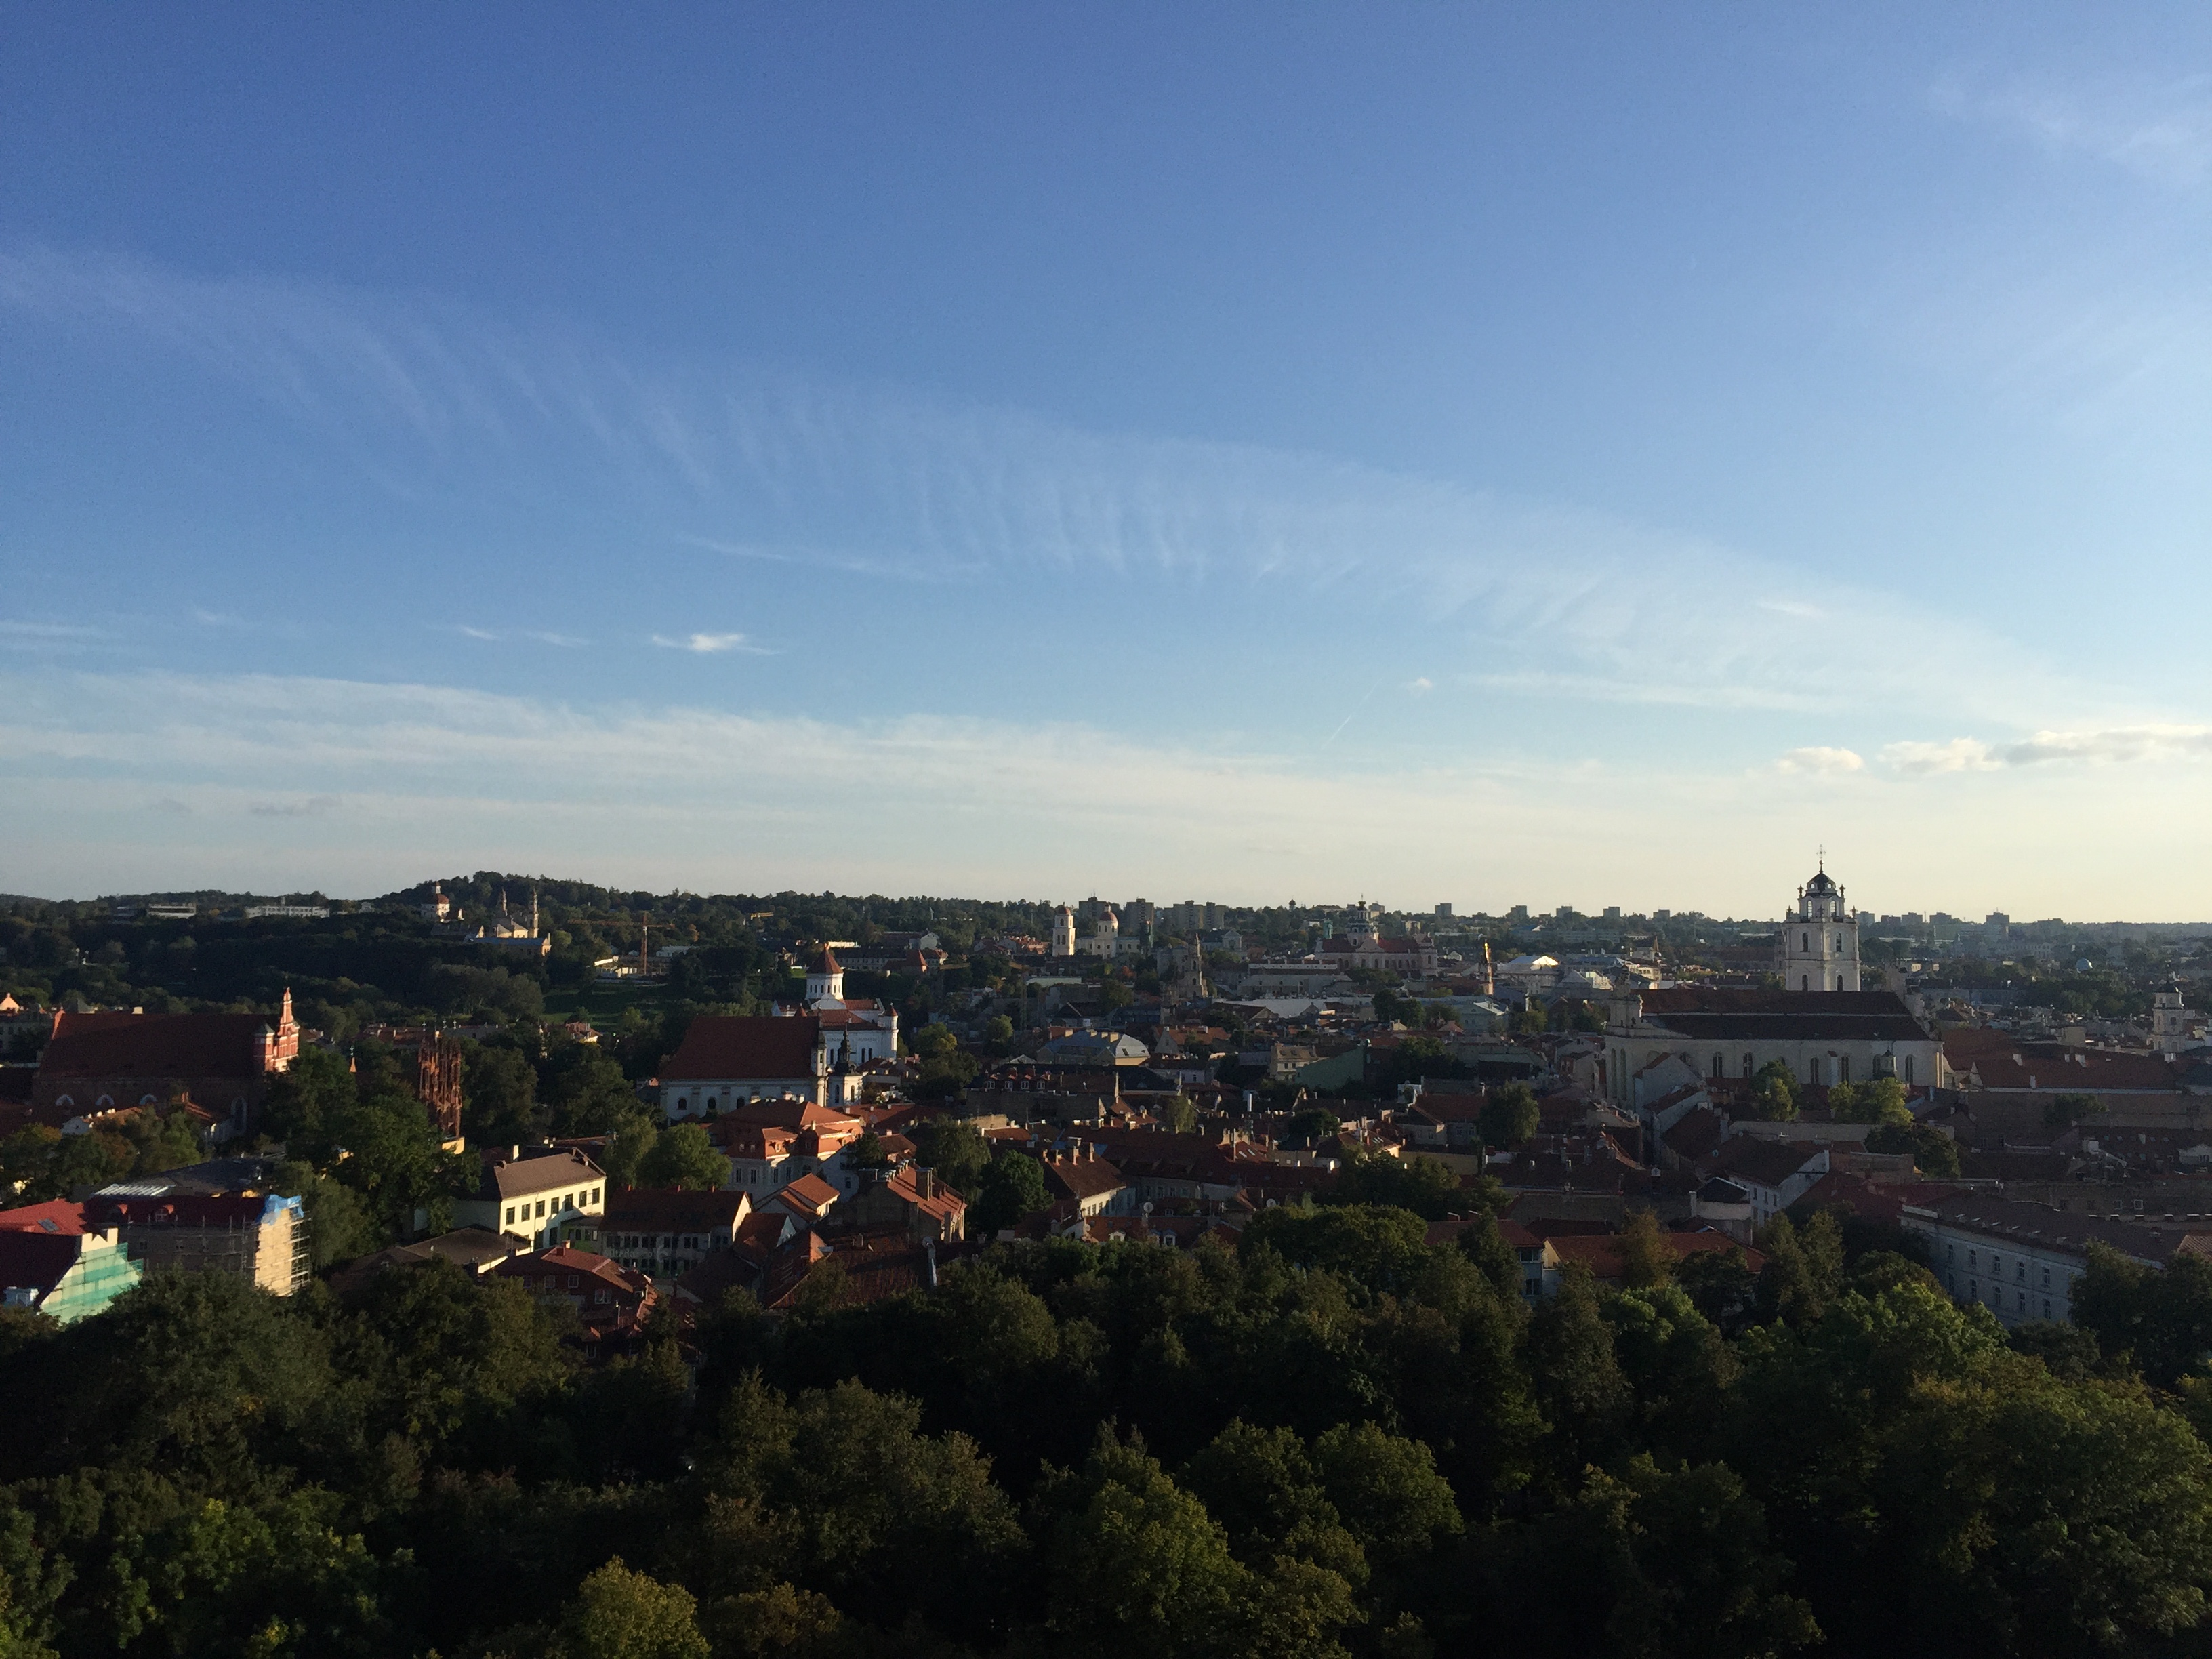 View of Vilnius Old Town from the top of Gediminas' Tower